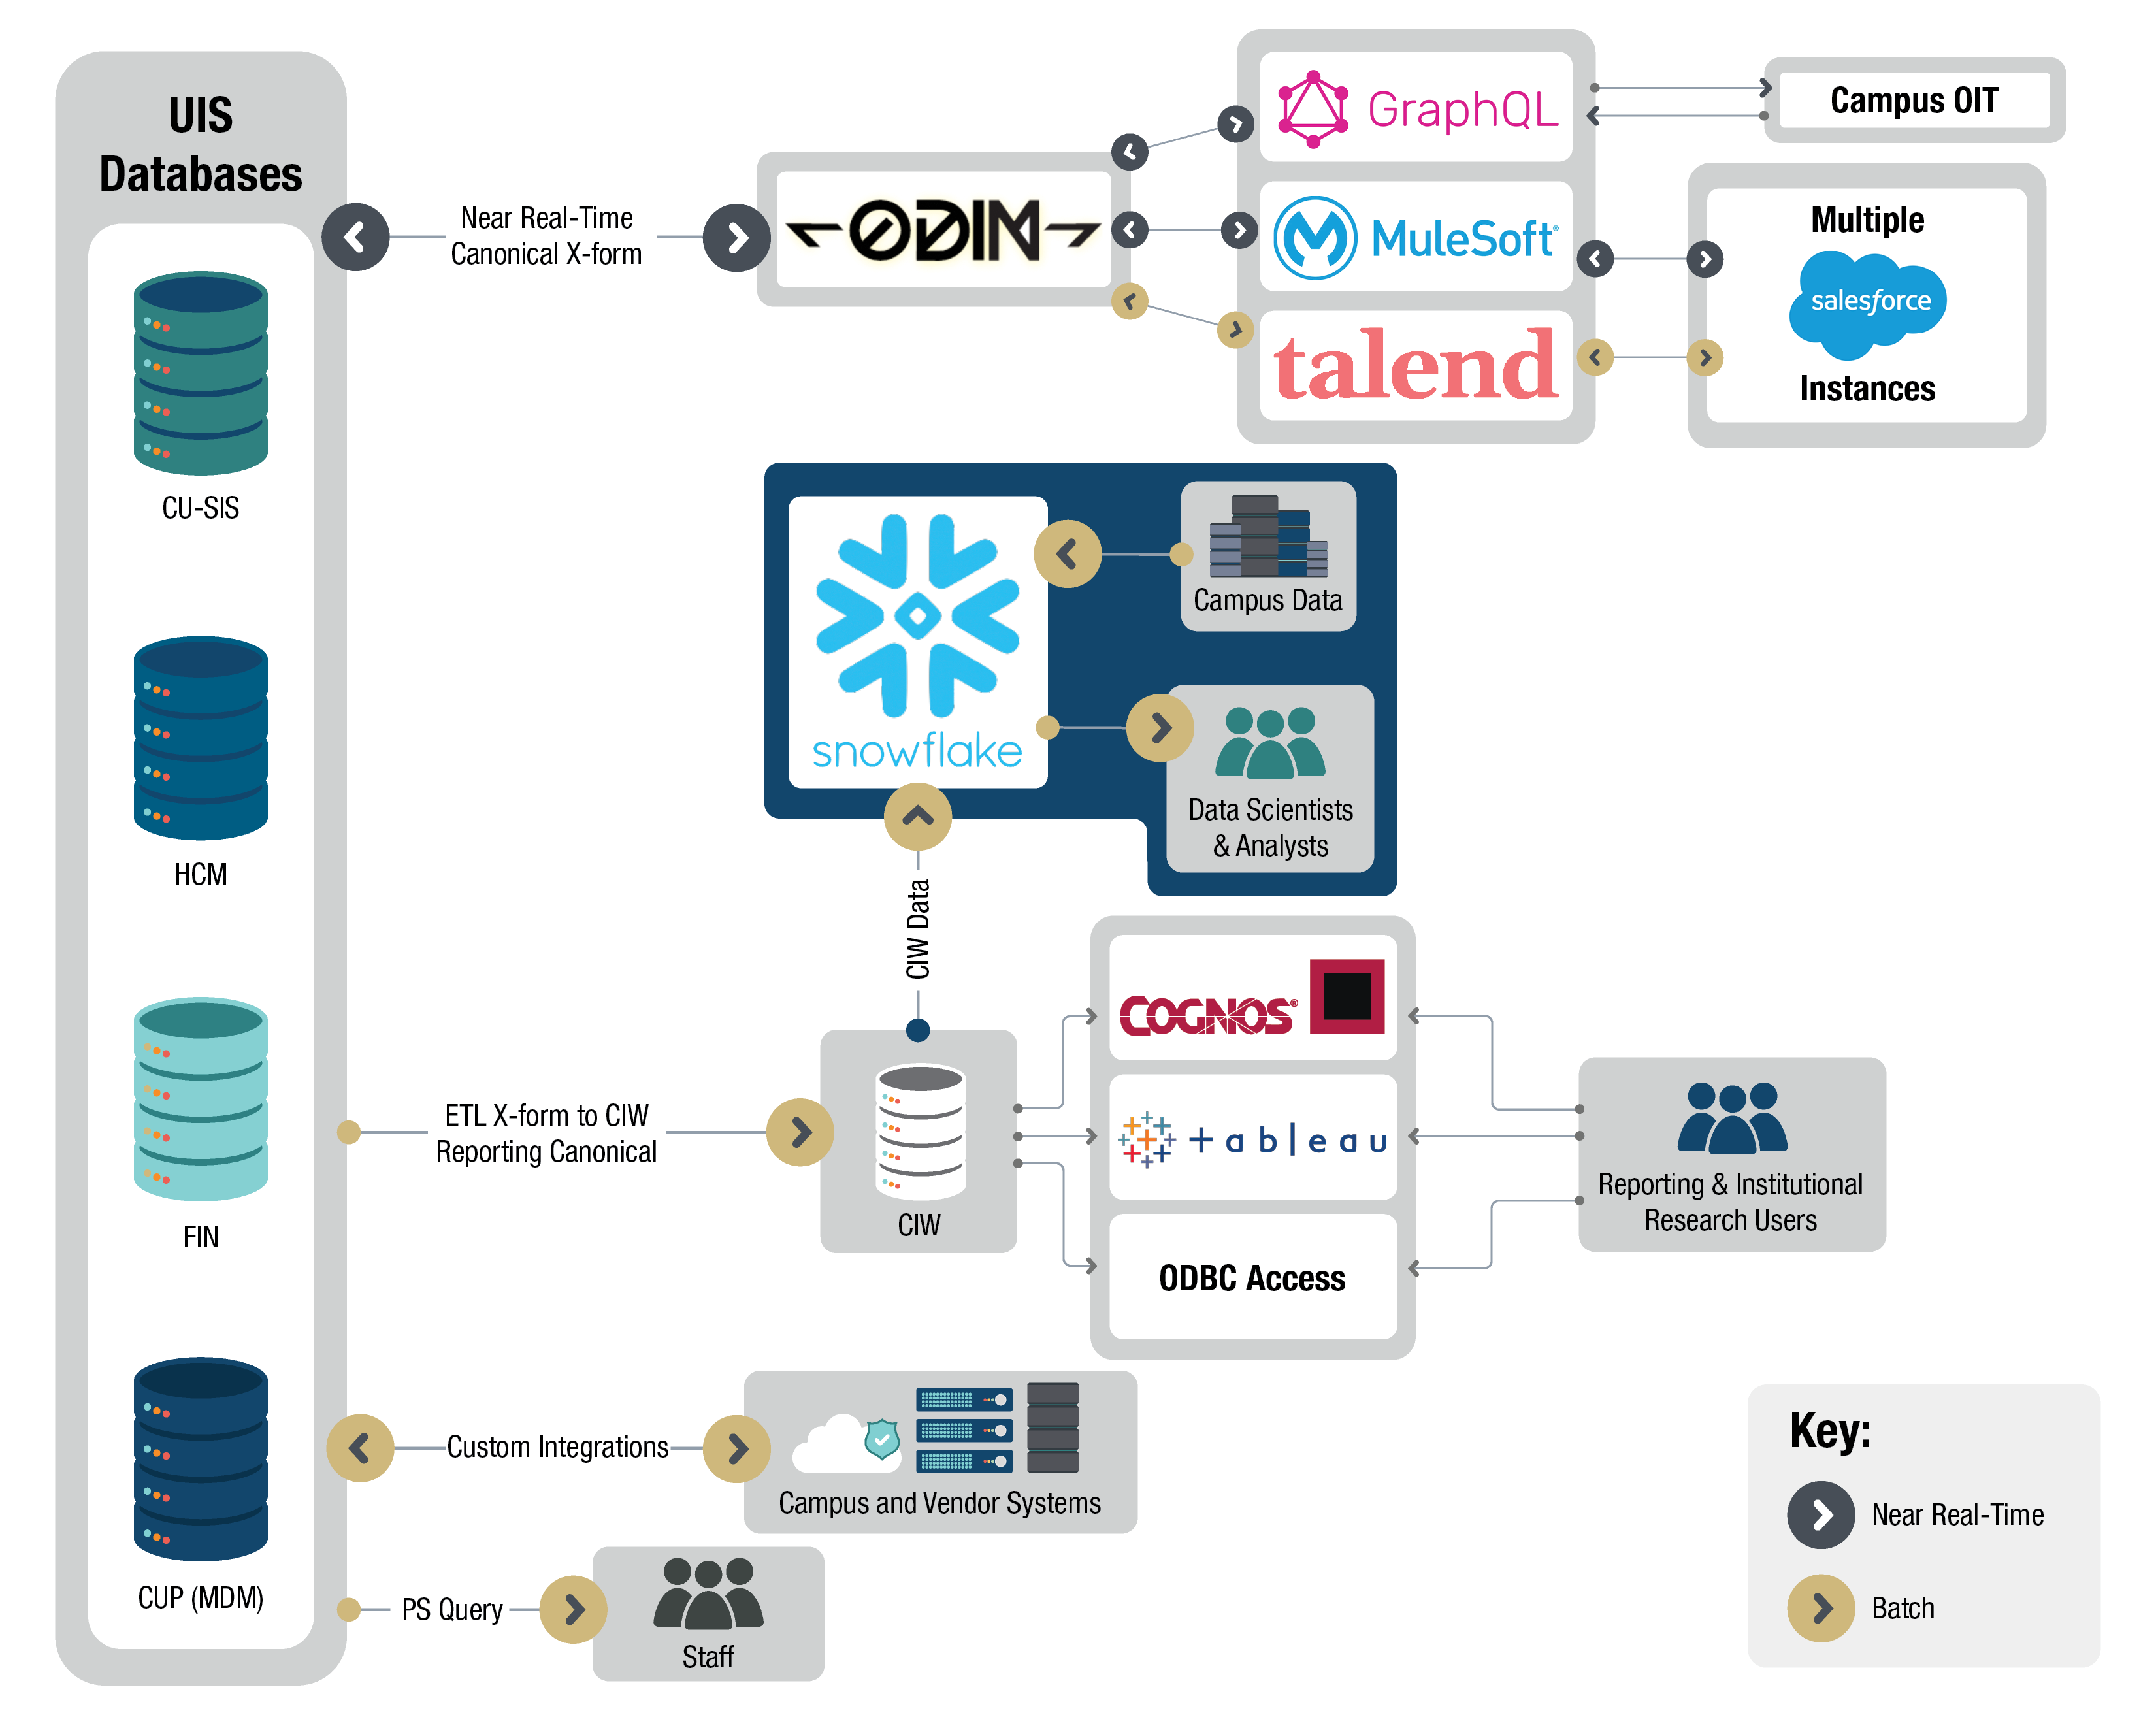 Infographic of Snowflake's role in CU's Data Landscape